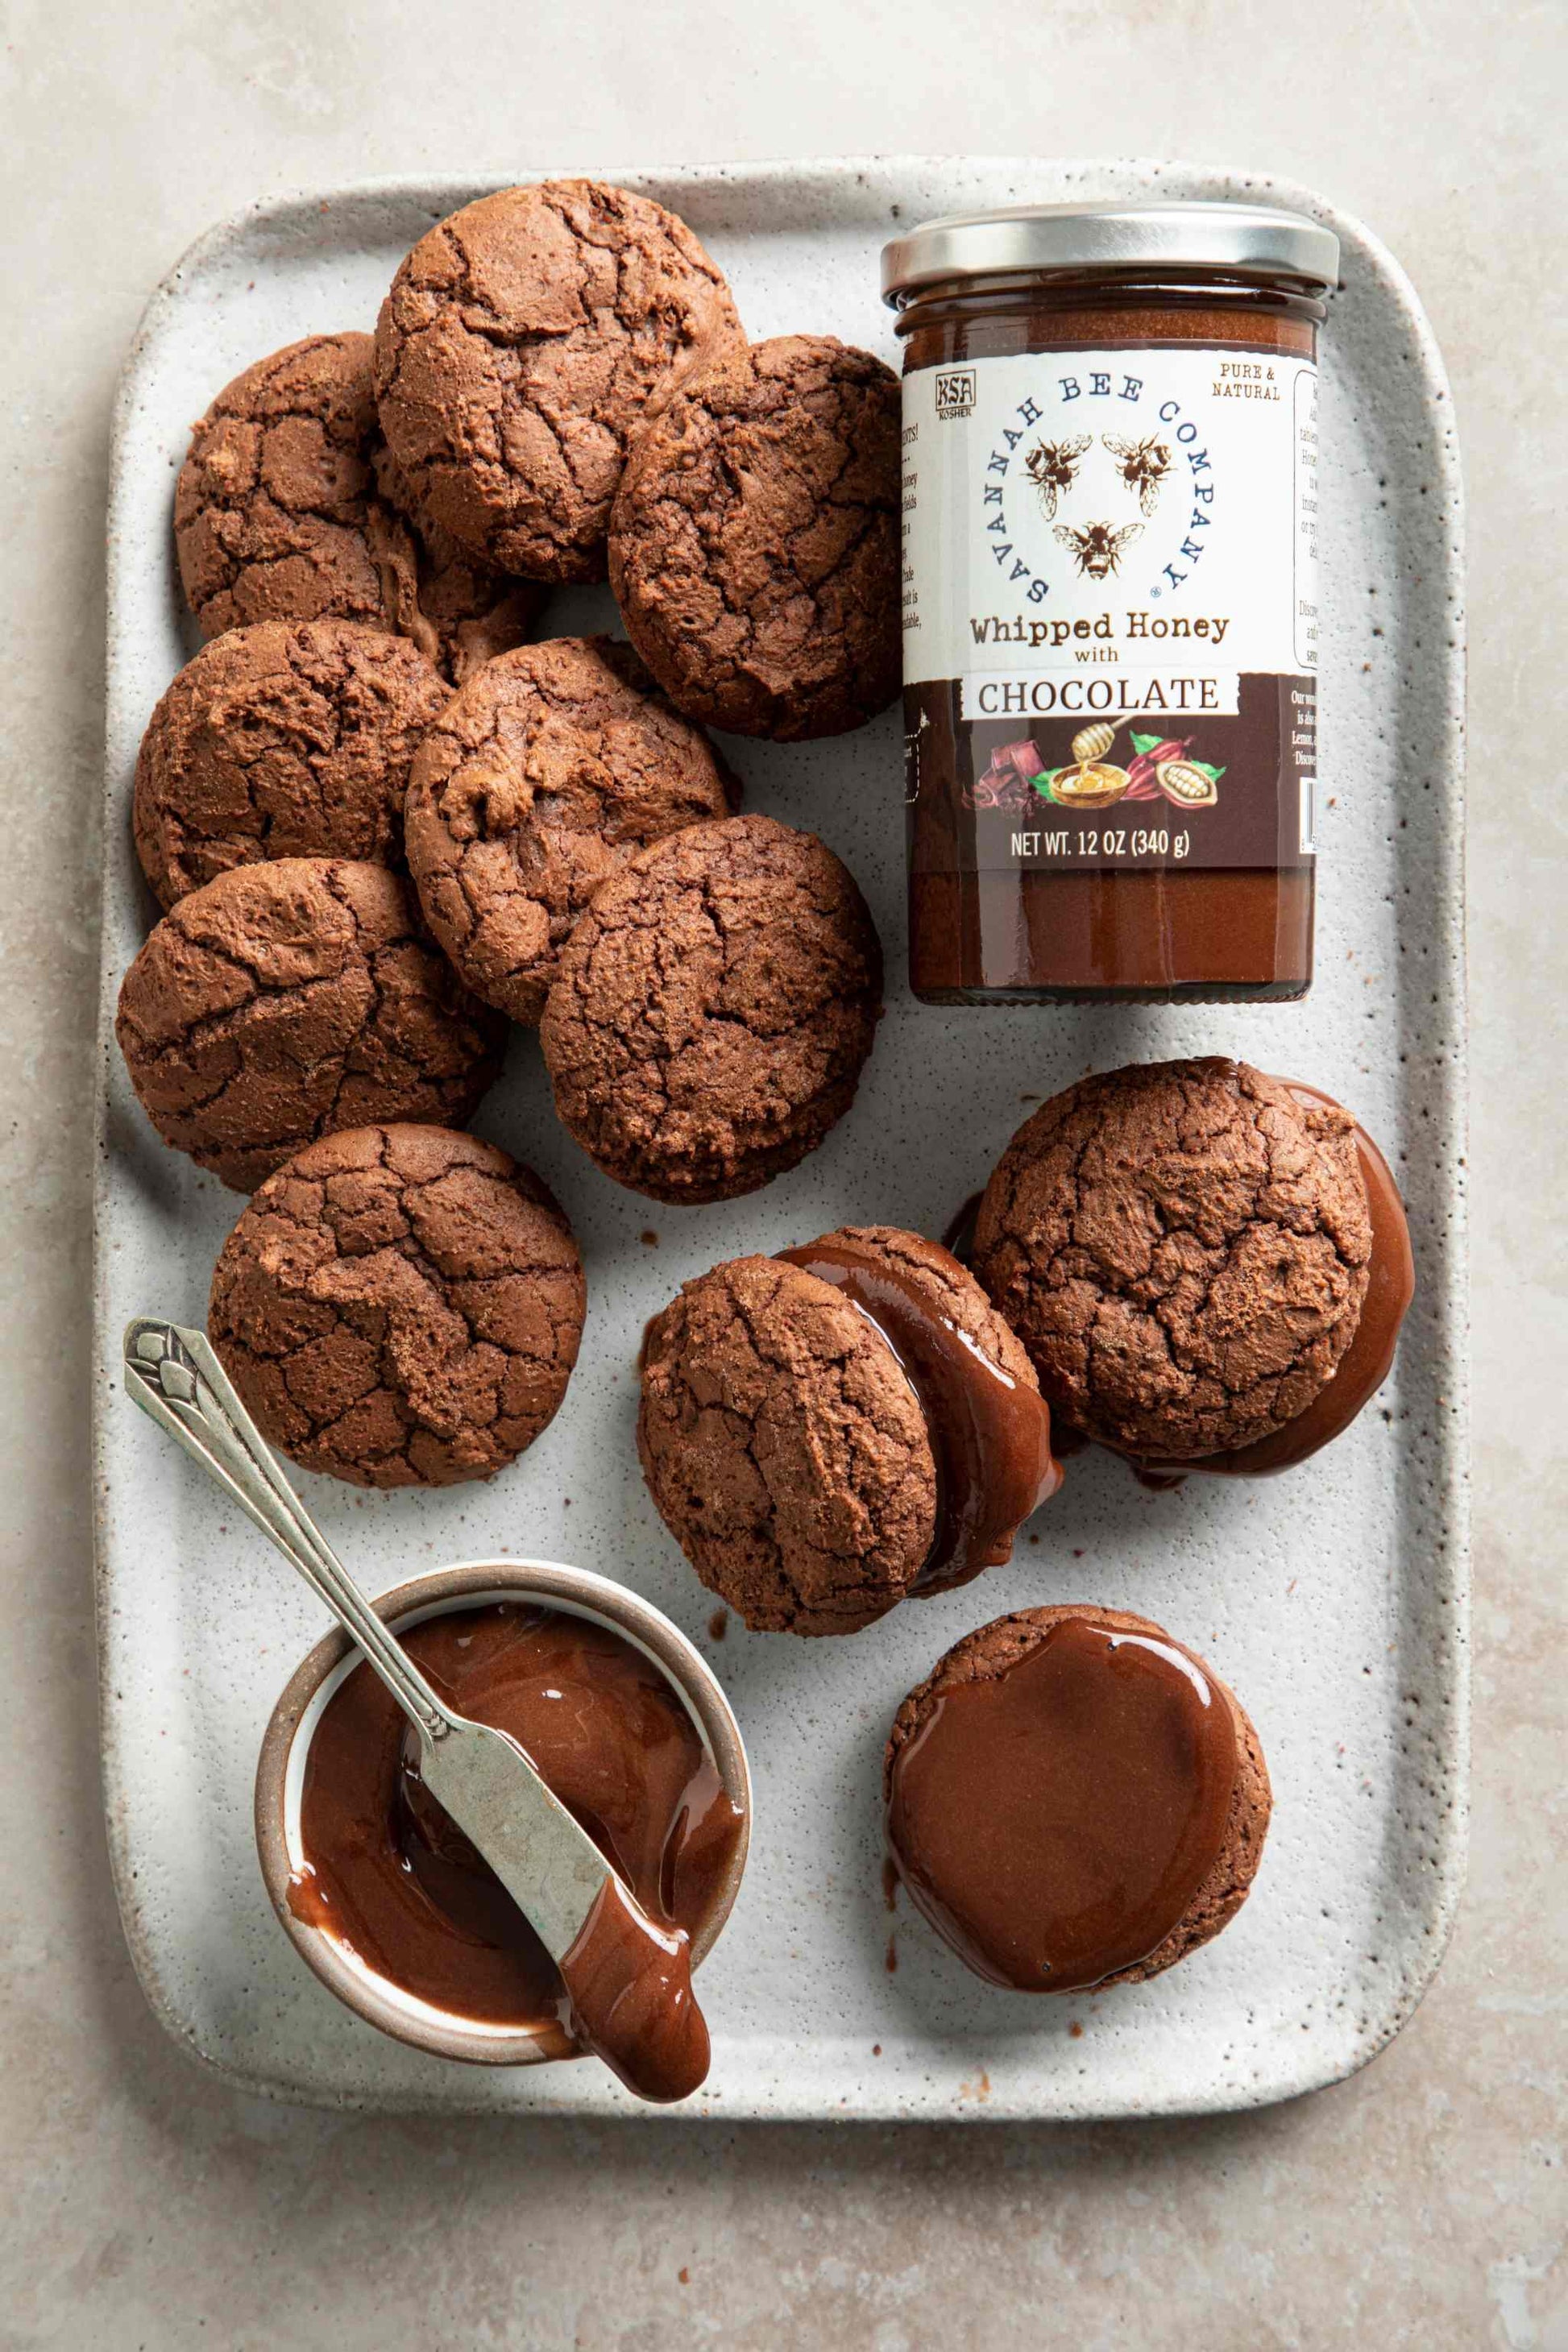 Chocolate Sandwich Cookies with Whipped Honey with Chocolate